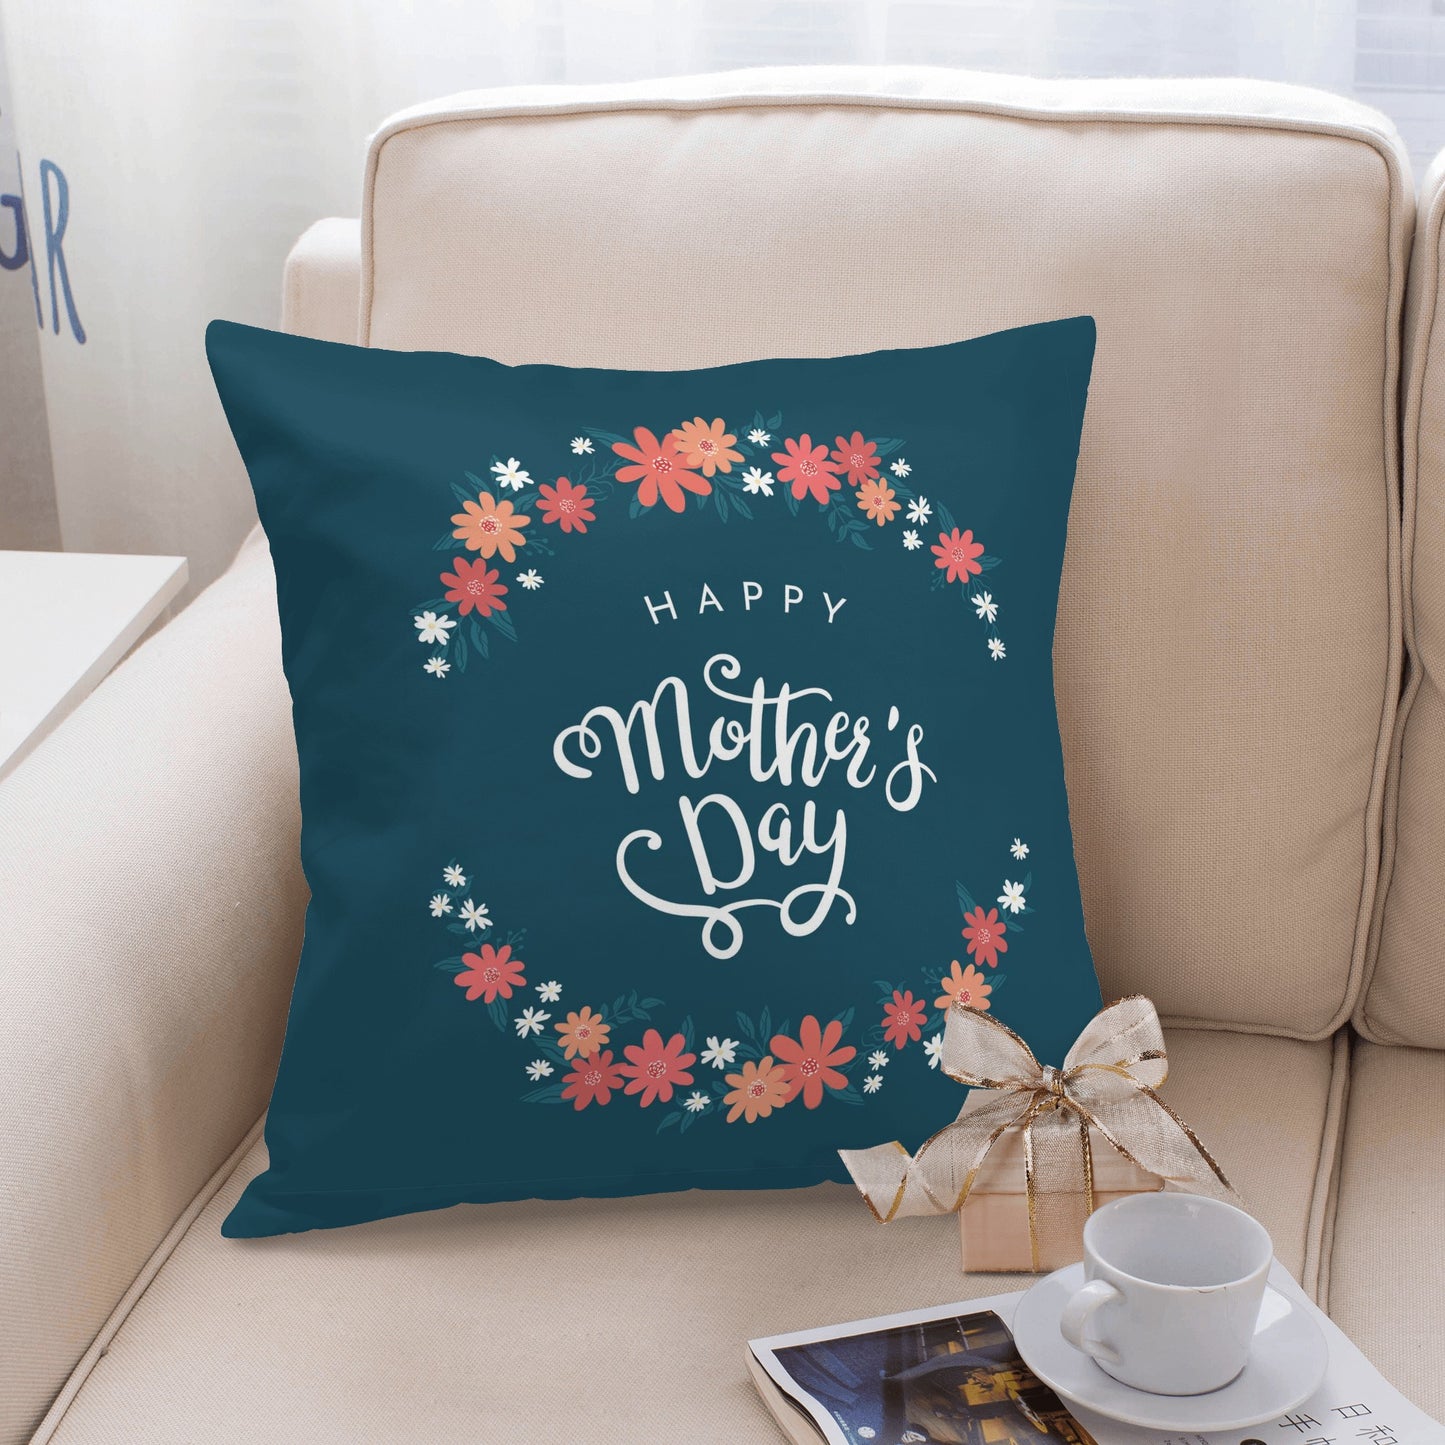 Happy Mothers Day Collection Pillow Covers Let the Giving Begin